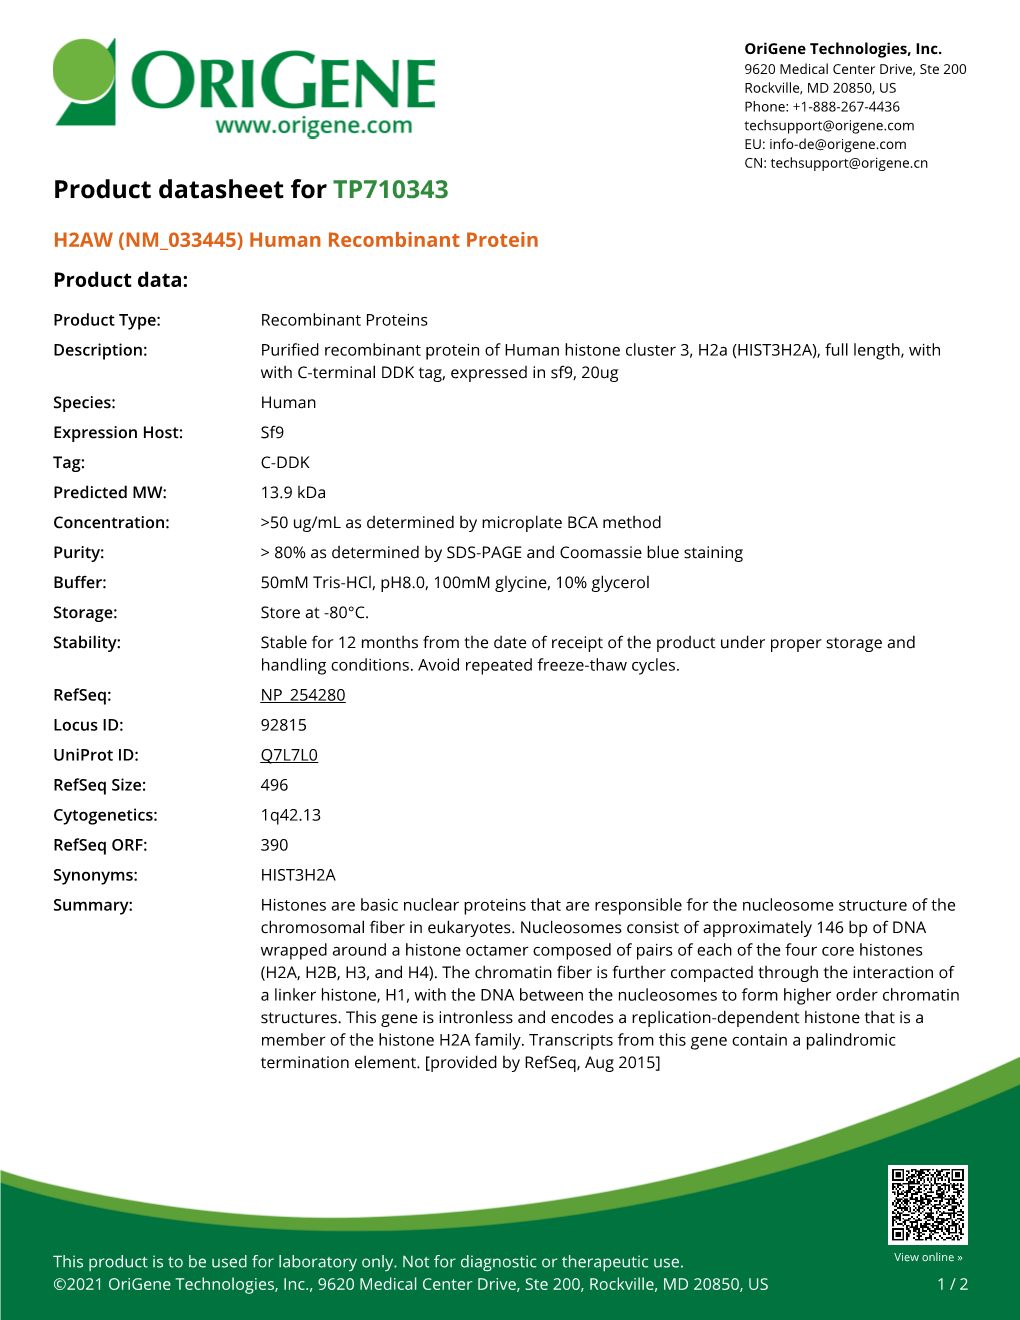 Human Recombinant Protein – TP710343